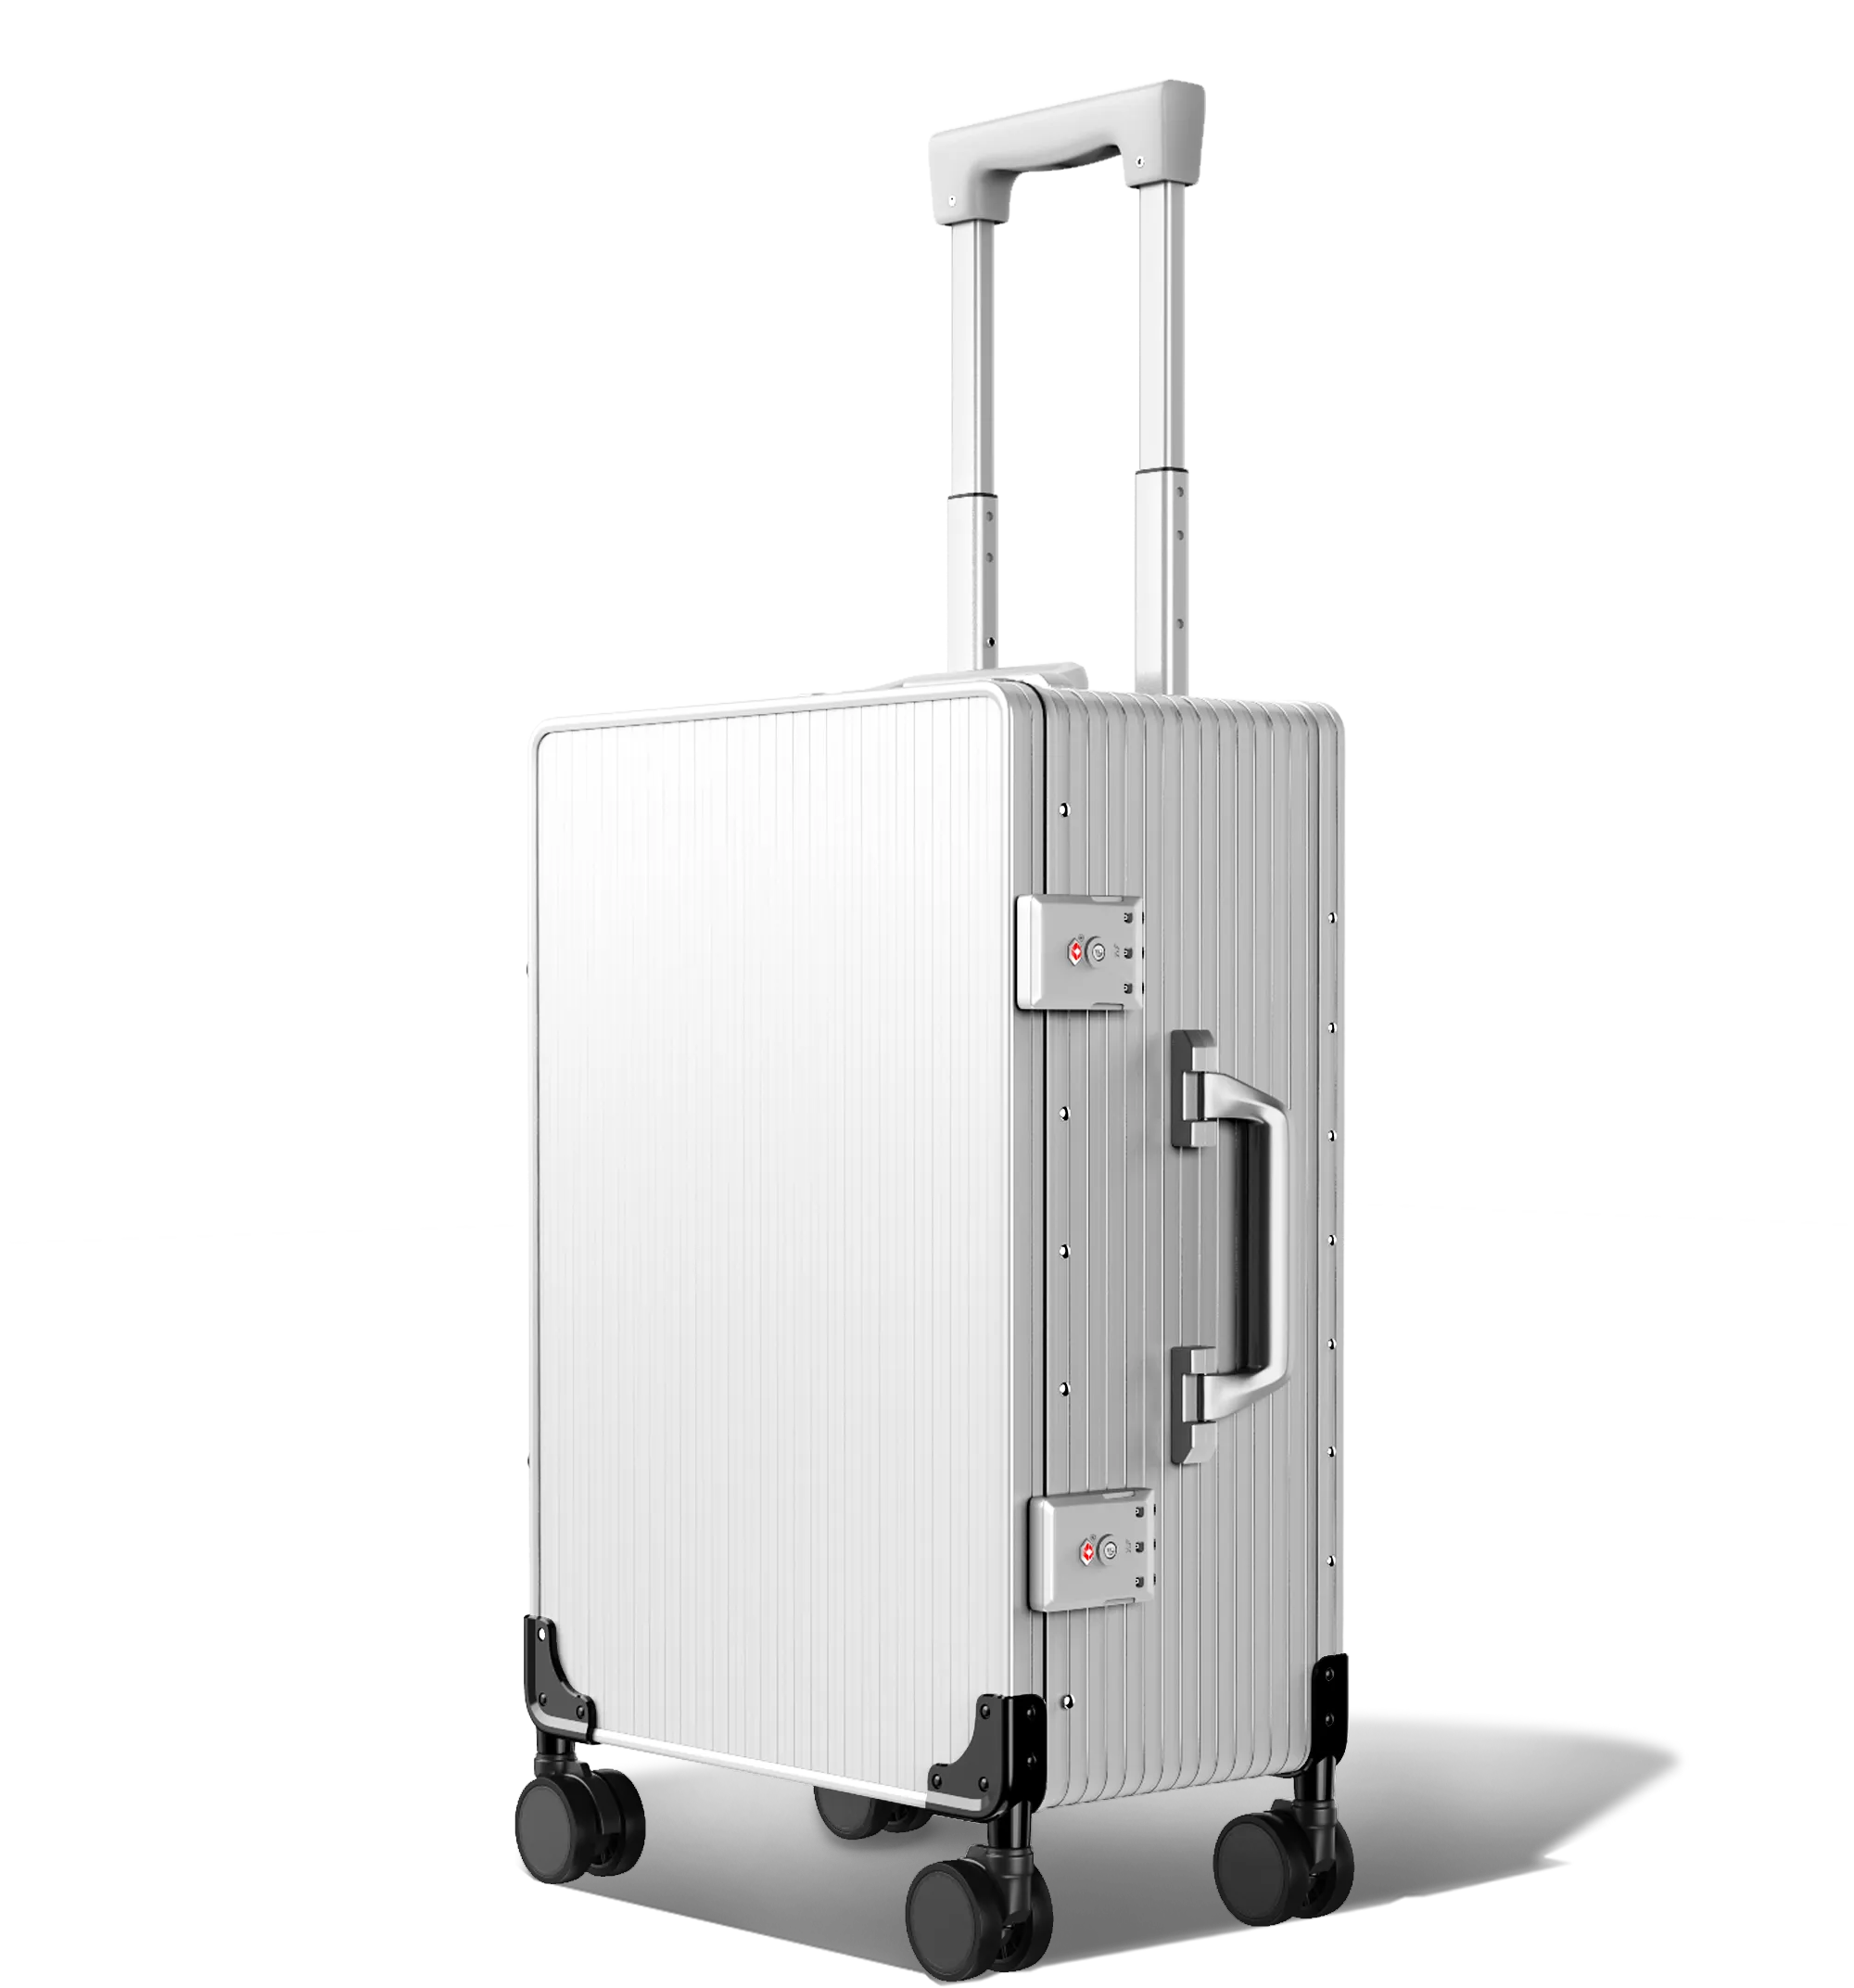 A three-quarter view of an upright Cabin in 56/20 Silver hard-shell aluminium Luggage with a textured surface, featuring an extended telescopic handle, a side handle, and four spinner wheels, set against a white background.